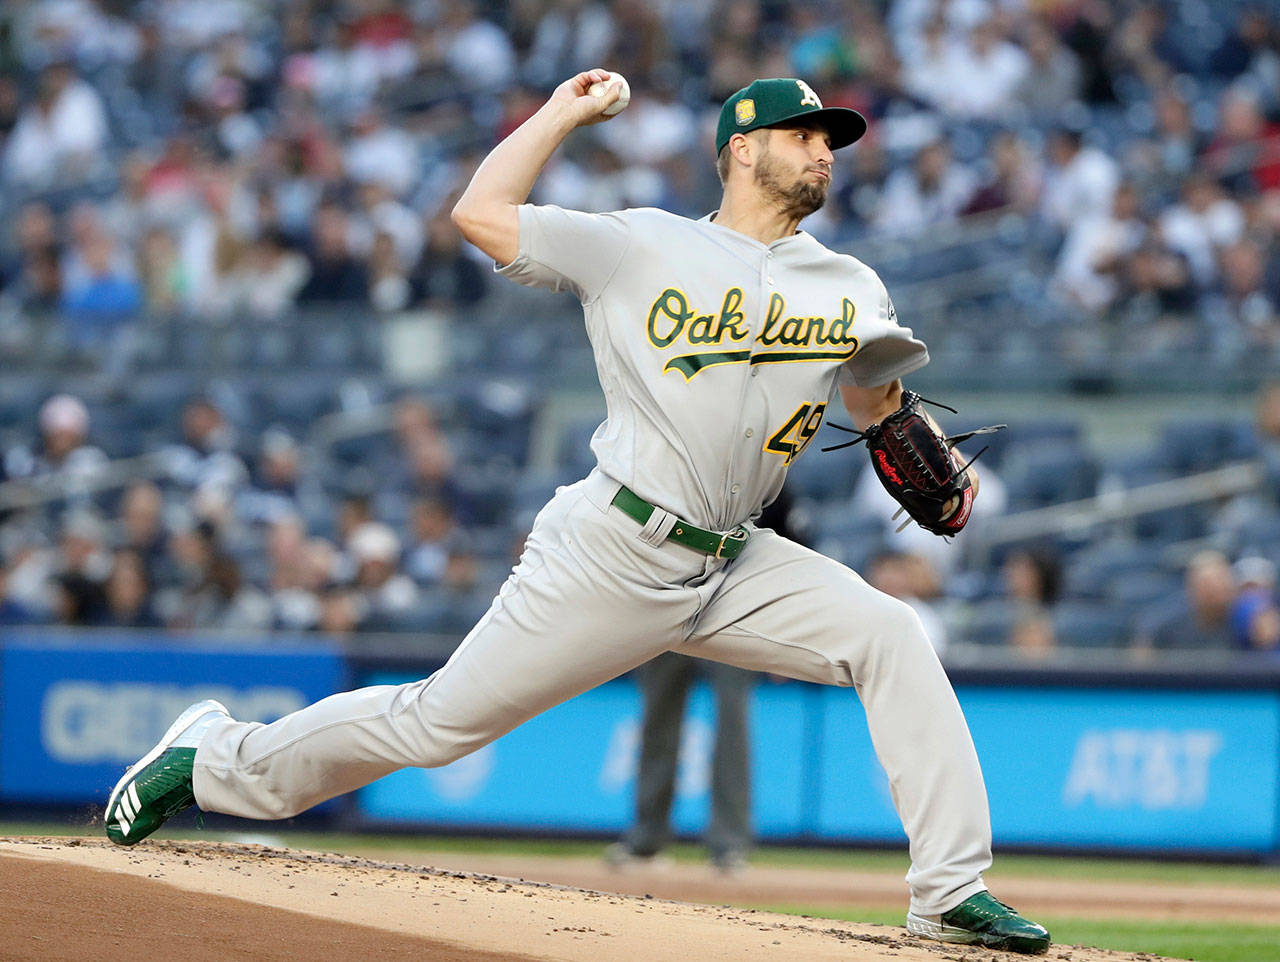 Oakland’s Kendall Graveman pitches in a May 11, 2018 game against the Yankees in New York. Seattle signed Graveman to a 1-year contract Tuesday. (AP Photo/Frank Franklin II, File)